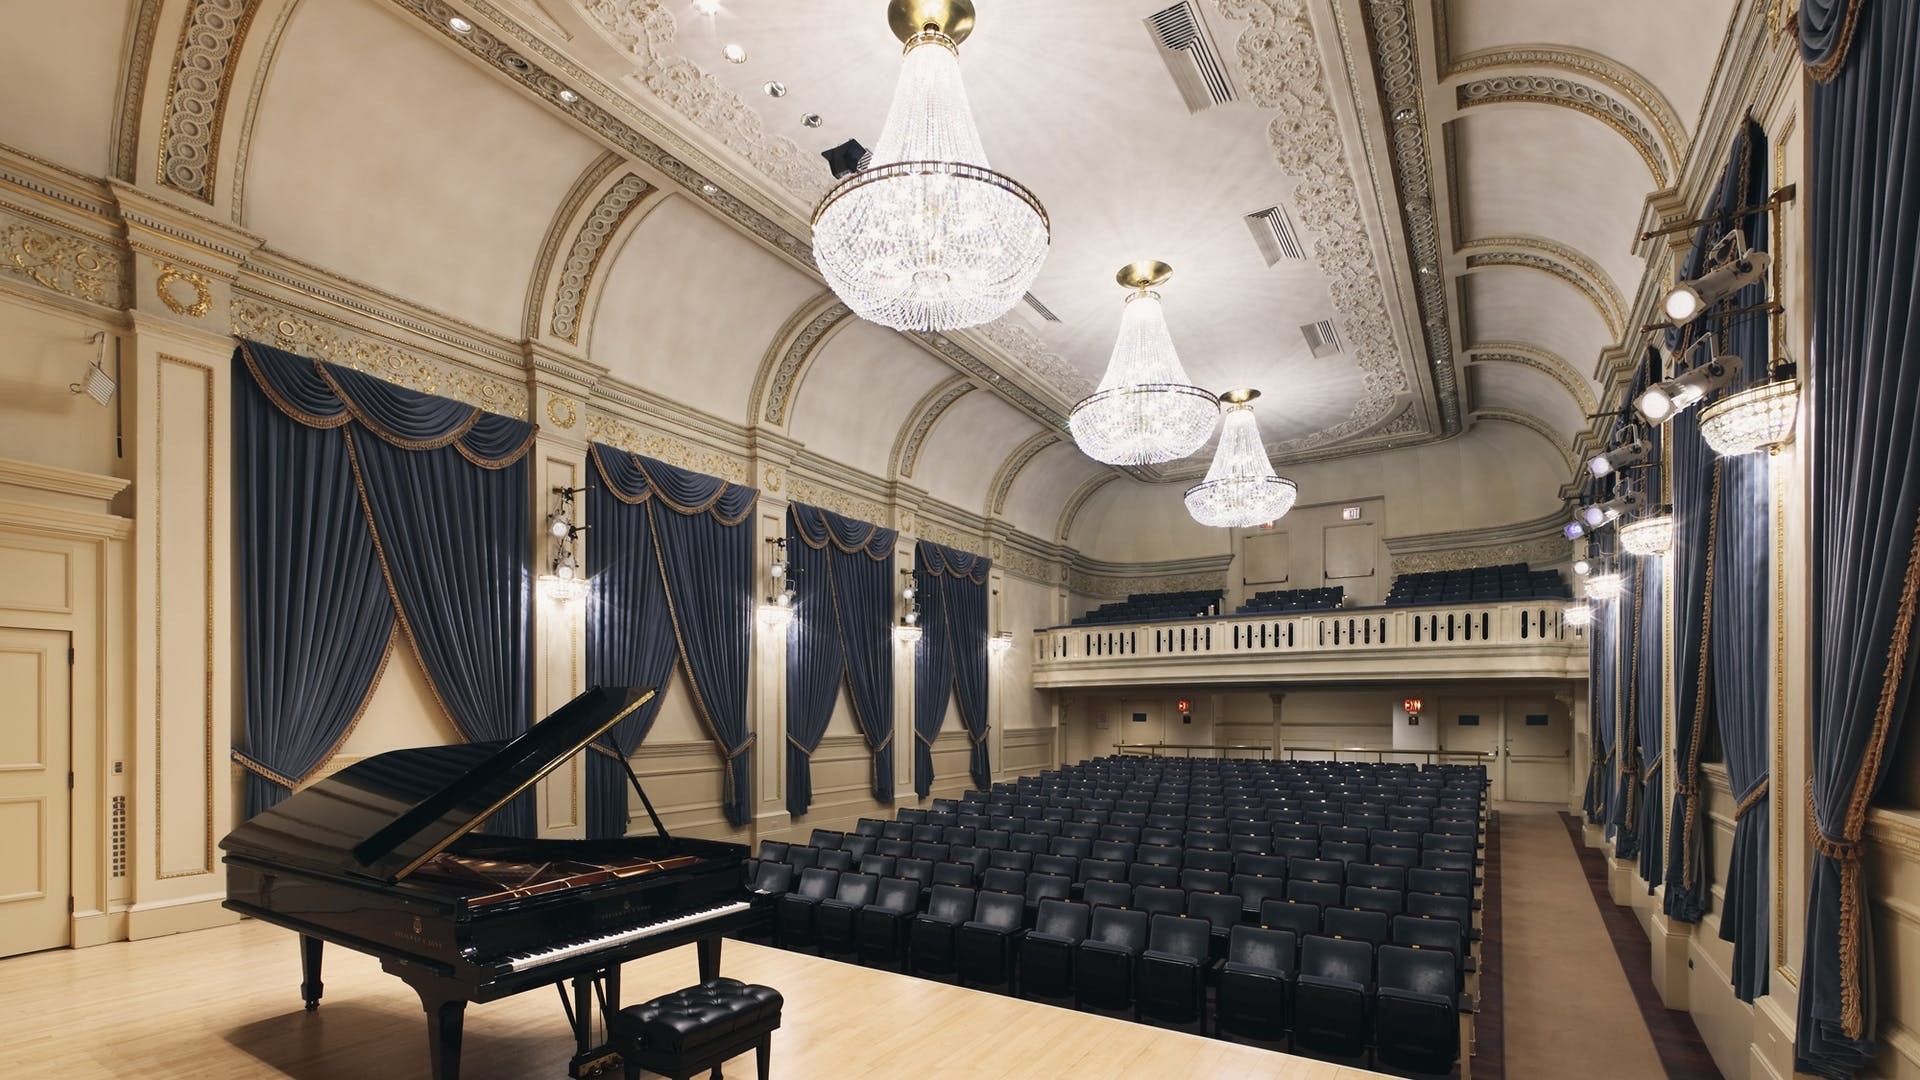 Weill Recital Hall at Carnegie Hall Performance Space in New York, NY